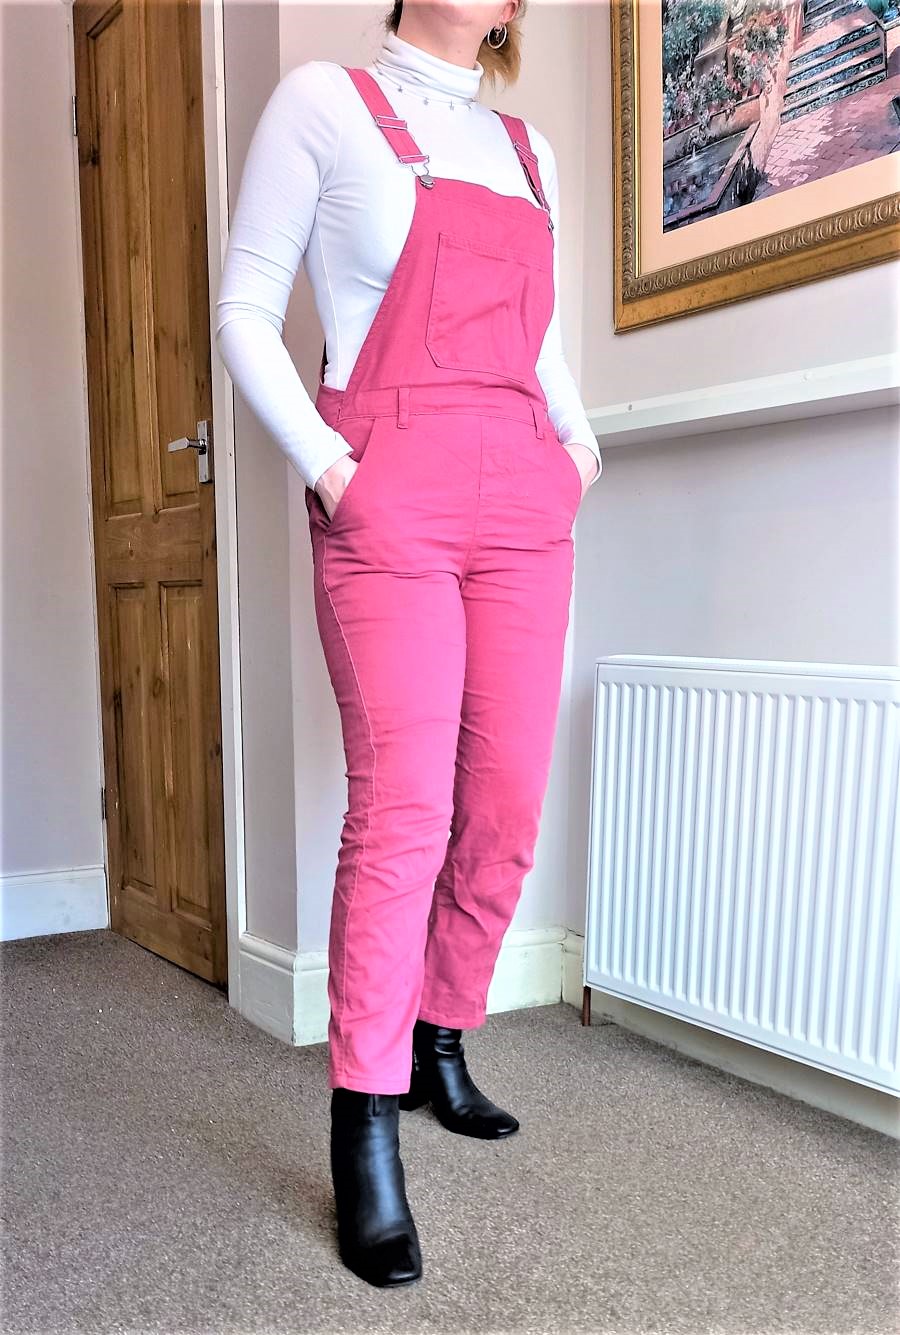 Dungarees and turtleneck